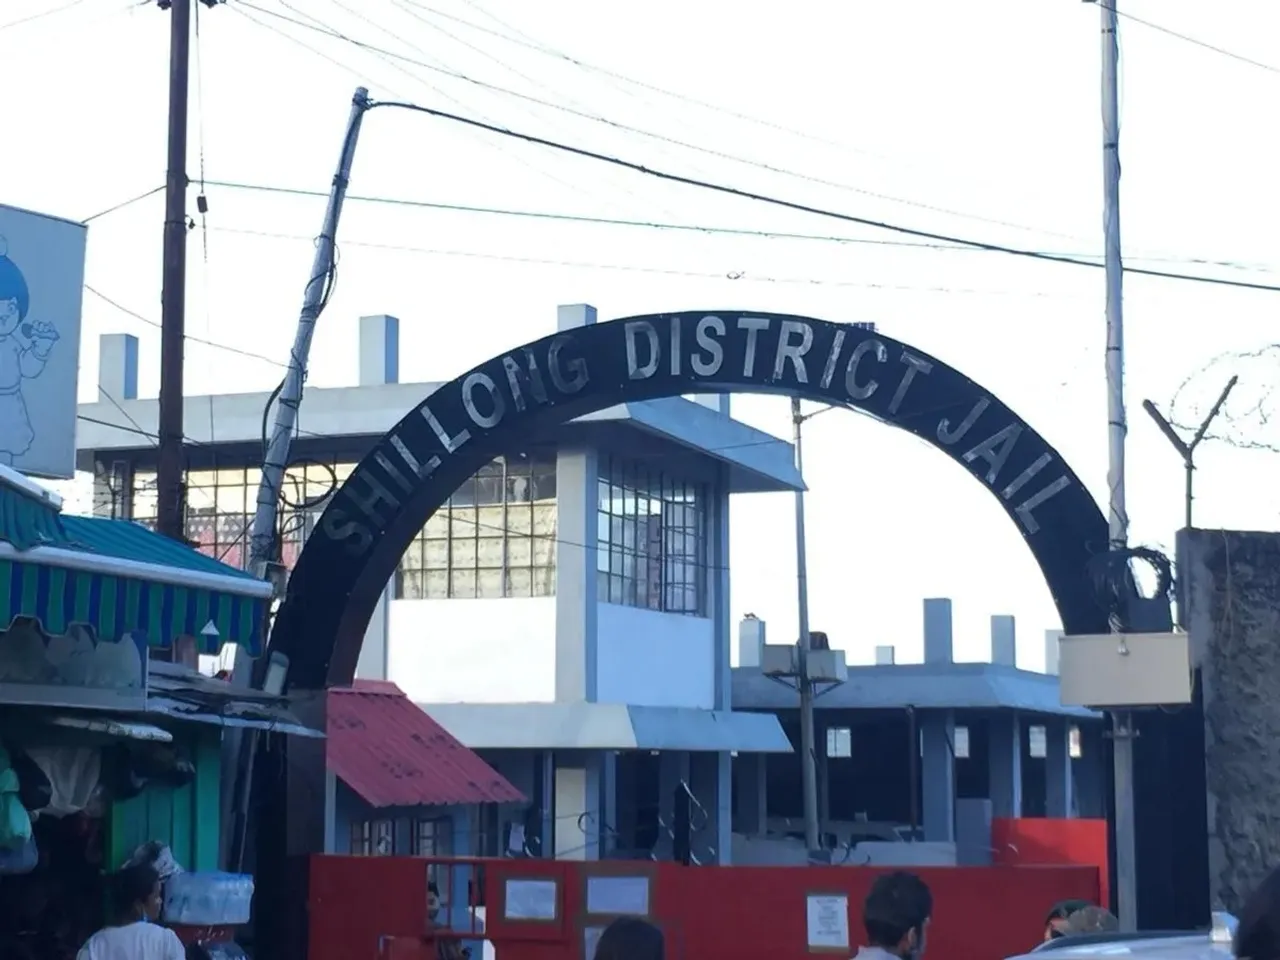 Shillong District Jail to be shifted to New Shillong township: DyCM